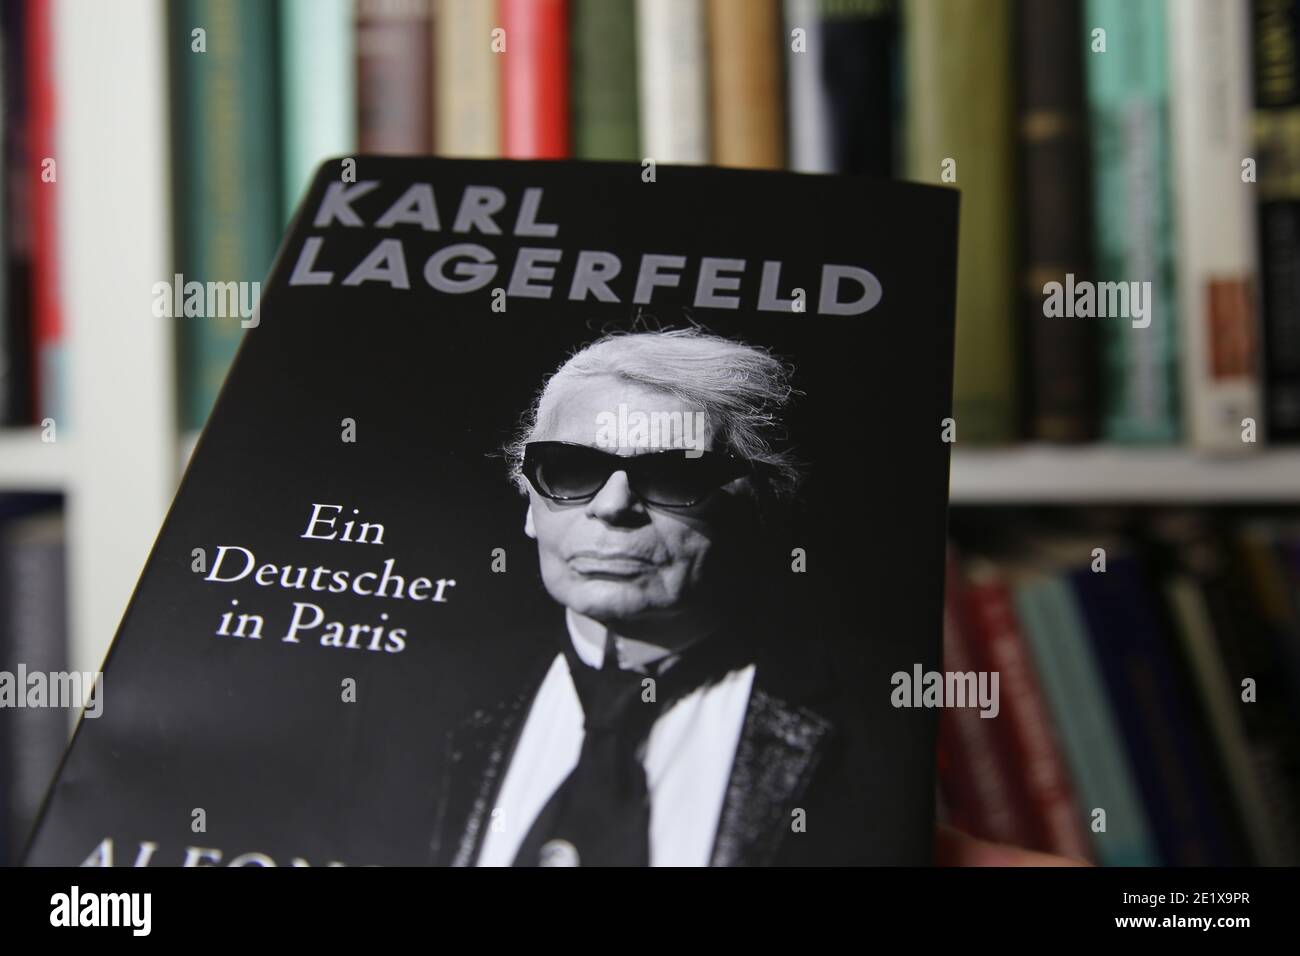 Viersen, Germany - January 2021: Close up of isolated book cover Karl  Lagerfeld a german in Paris, shelf background Stock Photo - Alamy